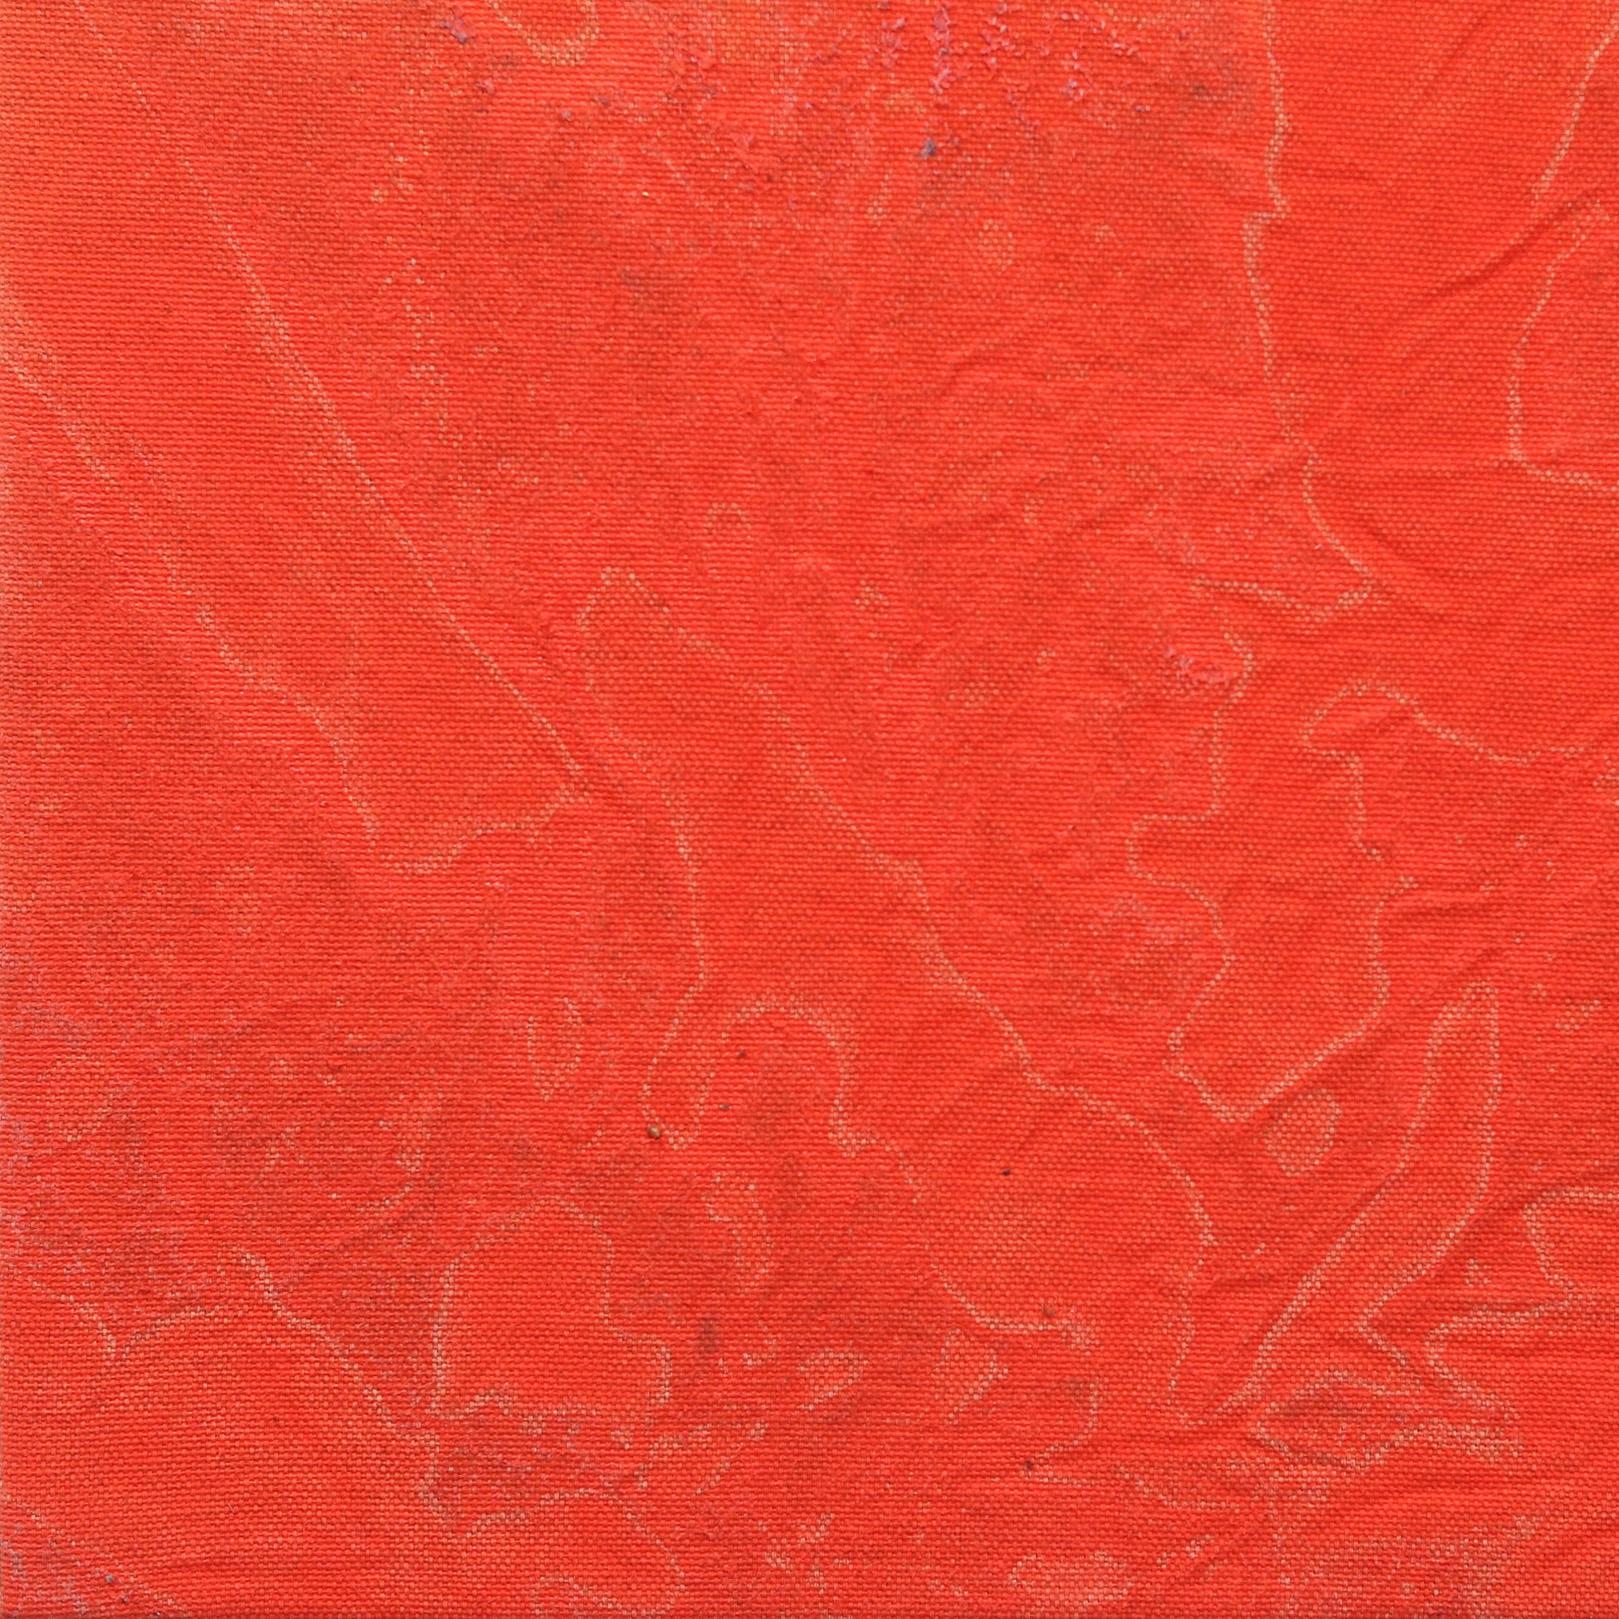 Concrete Sunset 2 - Bold Meditative Gold Leaf Red Painting on Linen Canvas For Sale 4